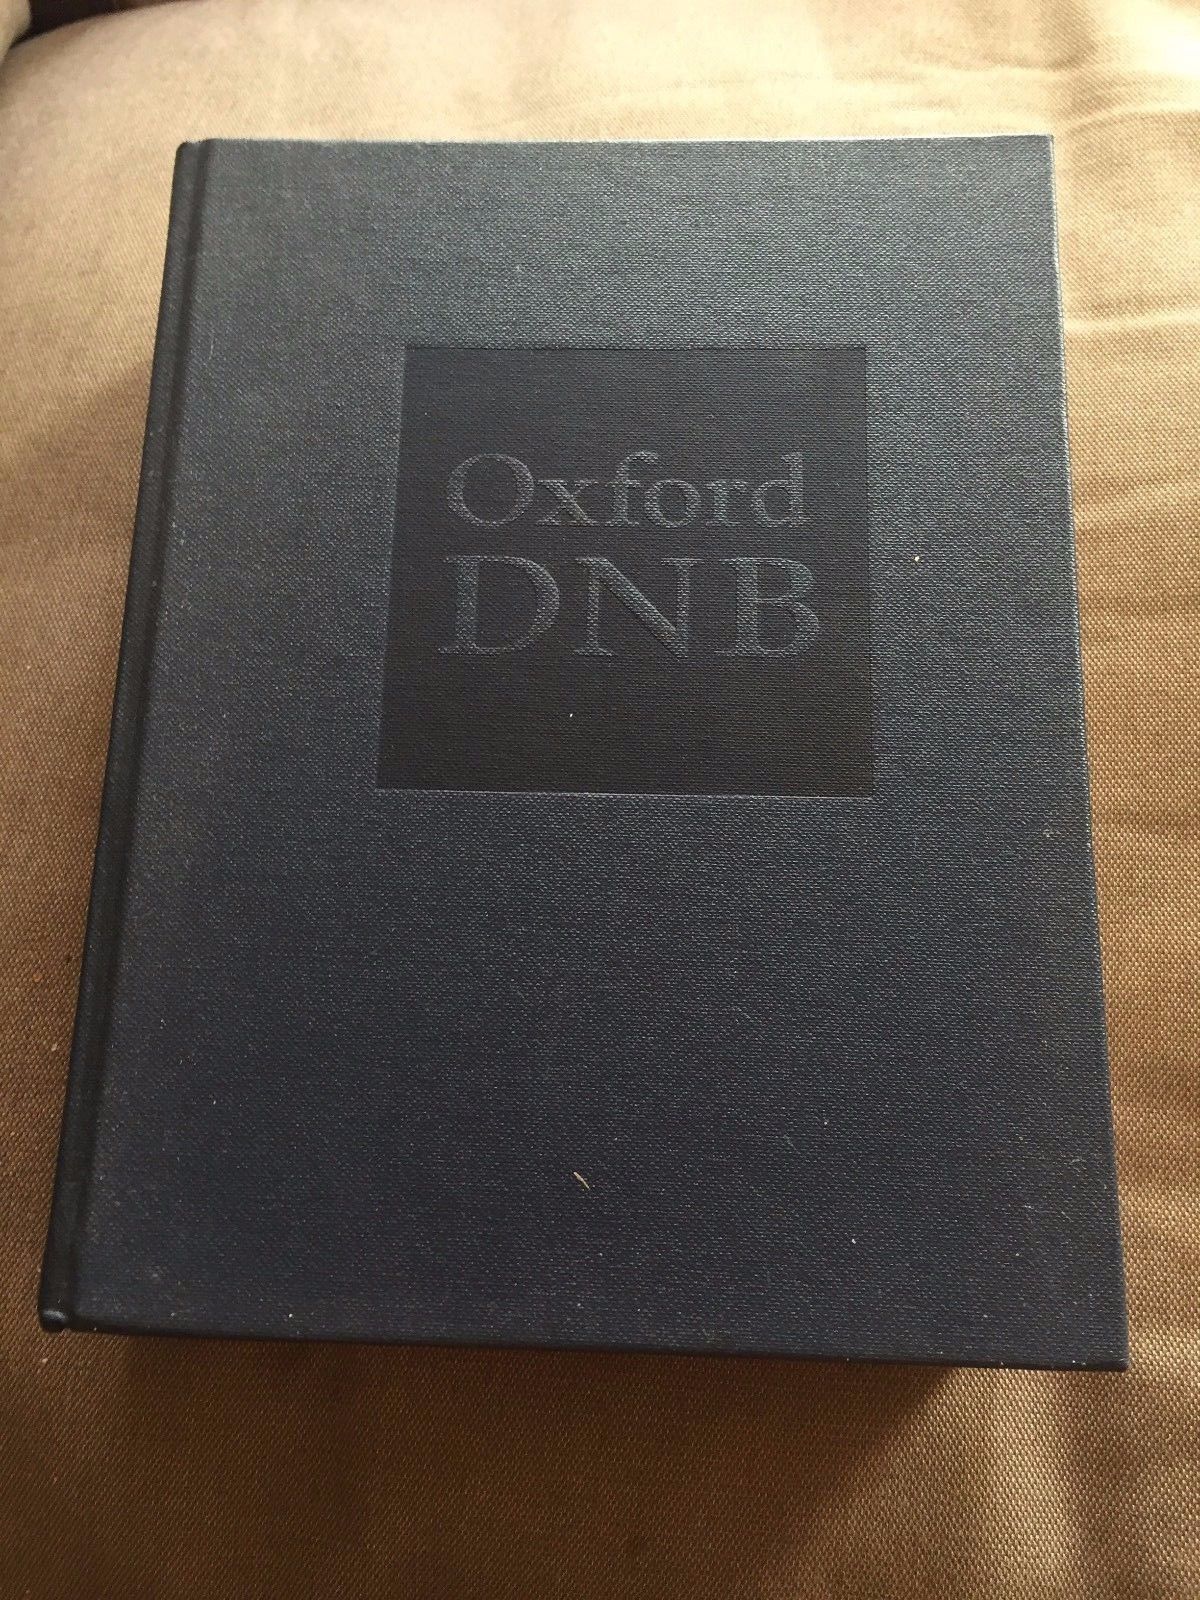 oxford dictionary of biography